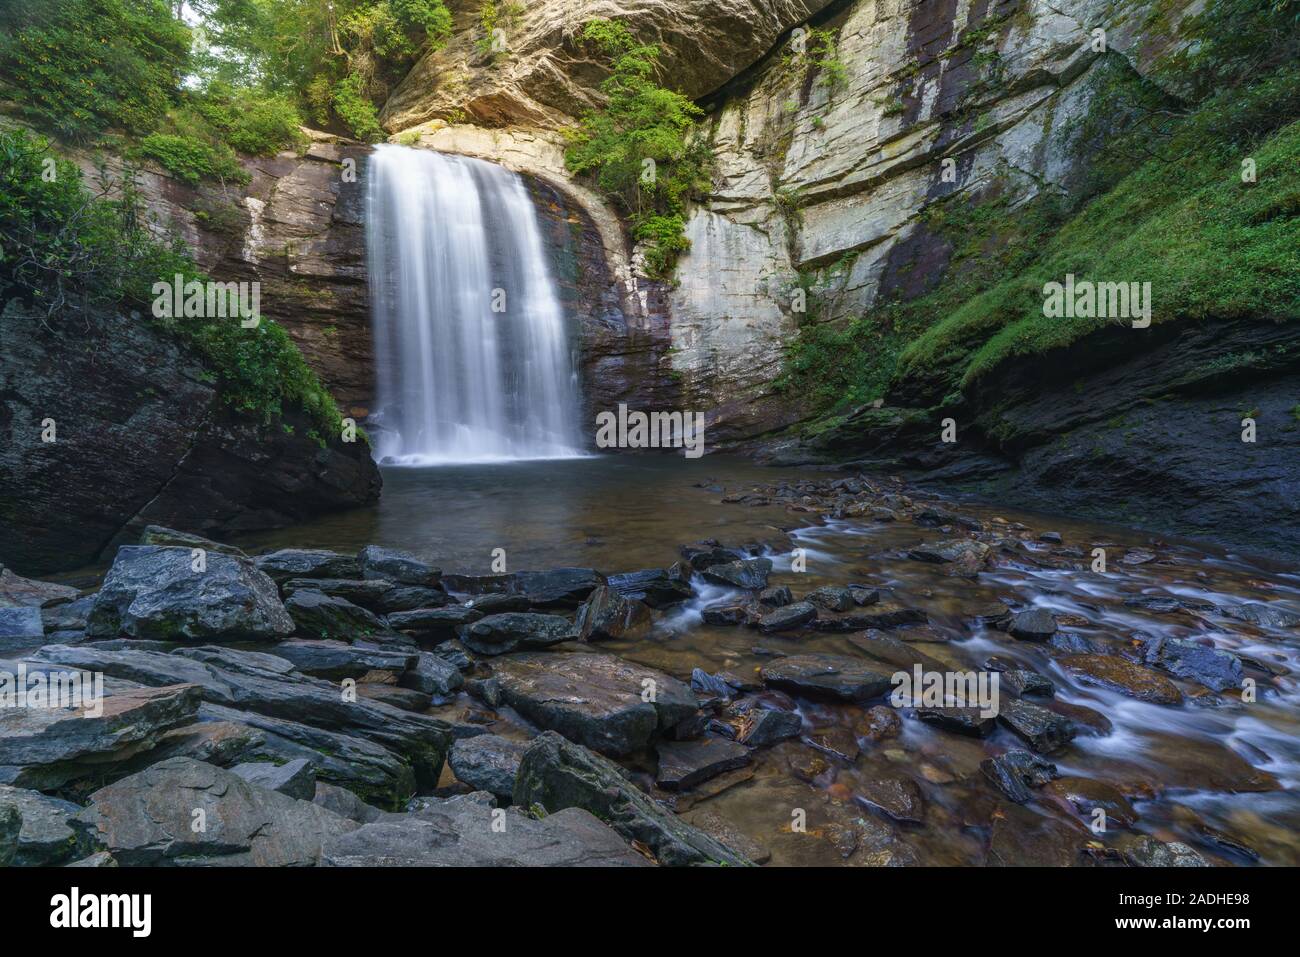 Looking Glass Falls in Pisgah National Forest, near Asheville, North Carolina Stock Photo